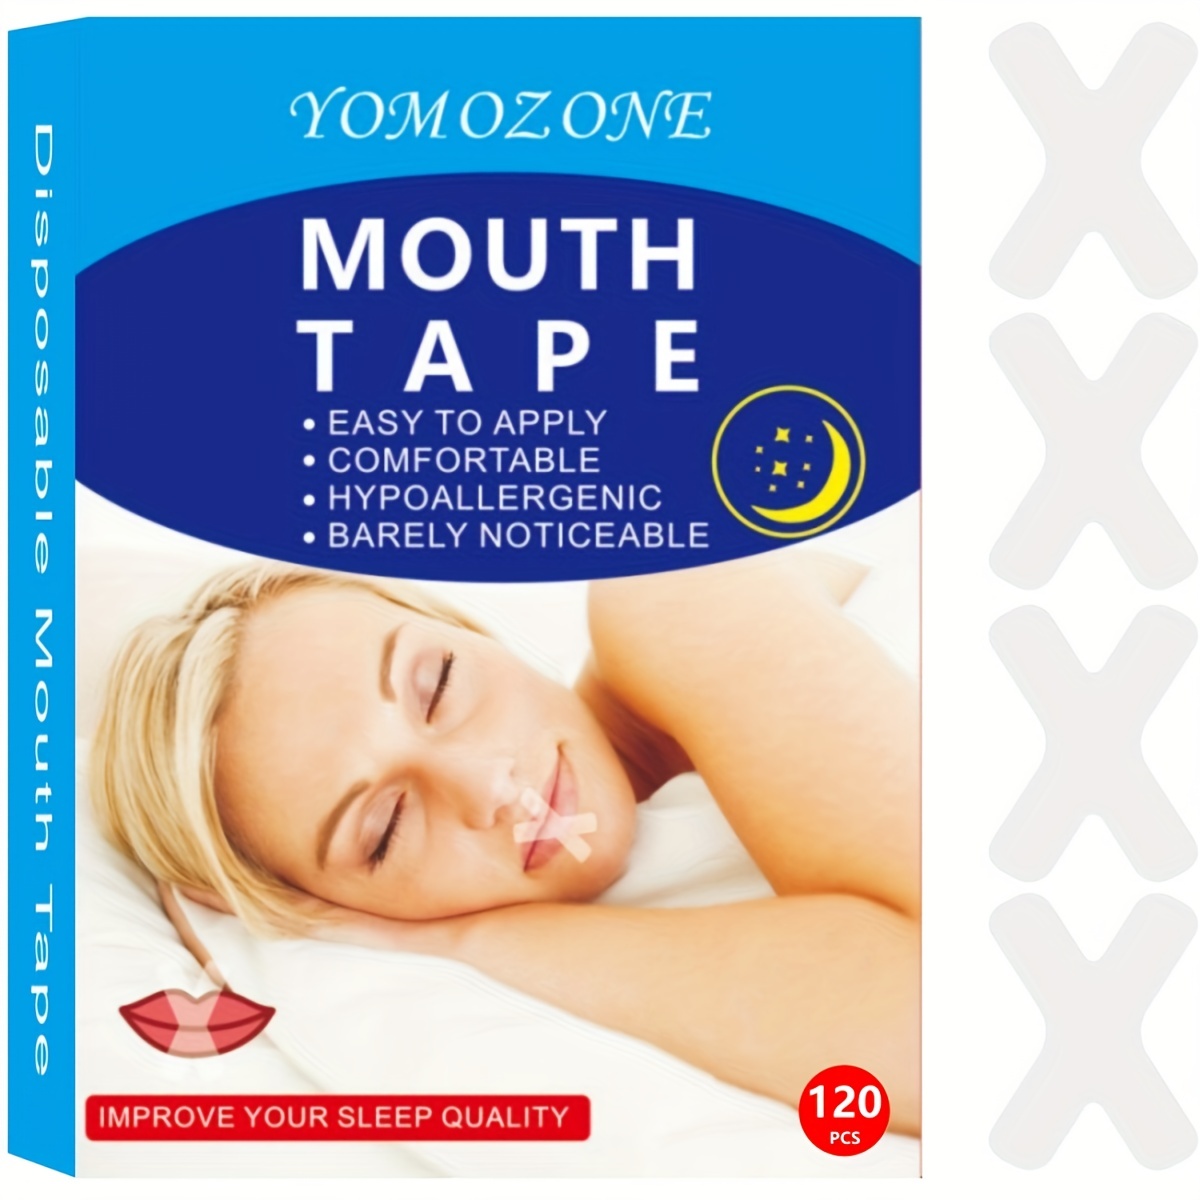 DREAM TAPE. This thing is a game changer. So simple and effective. #mo, mouth tape for sleep